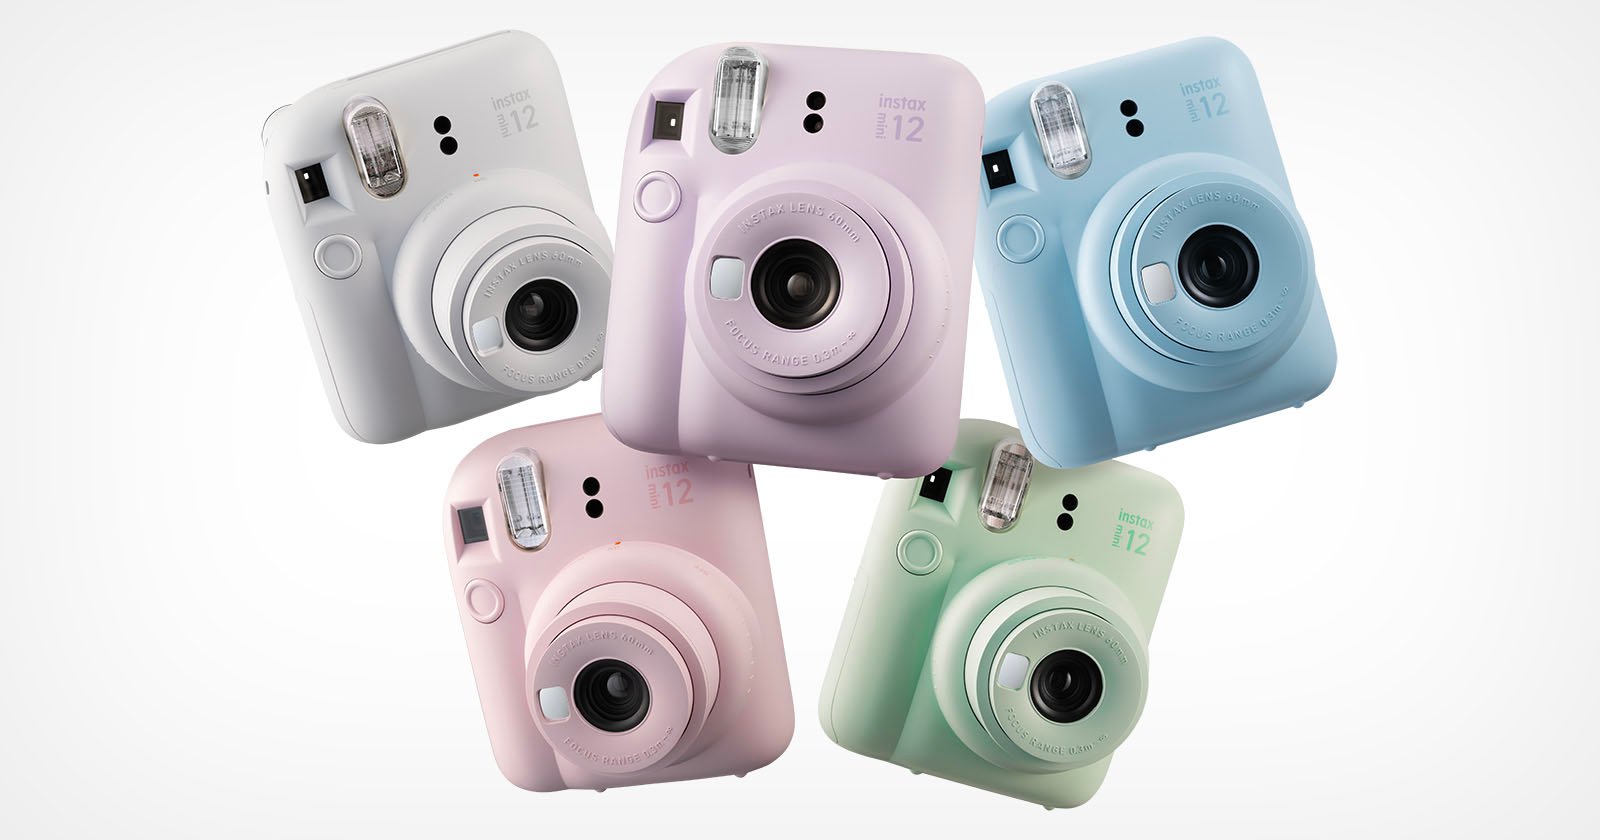 Fujifilm Instax Mini 12 Features New Design and Improved Functionality |  PetaPixel